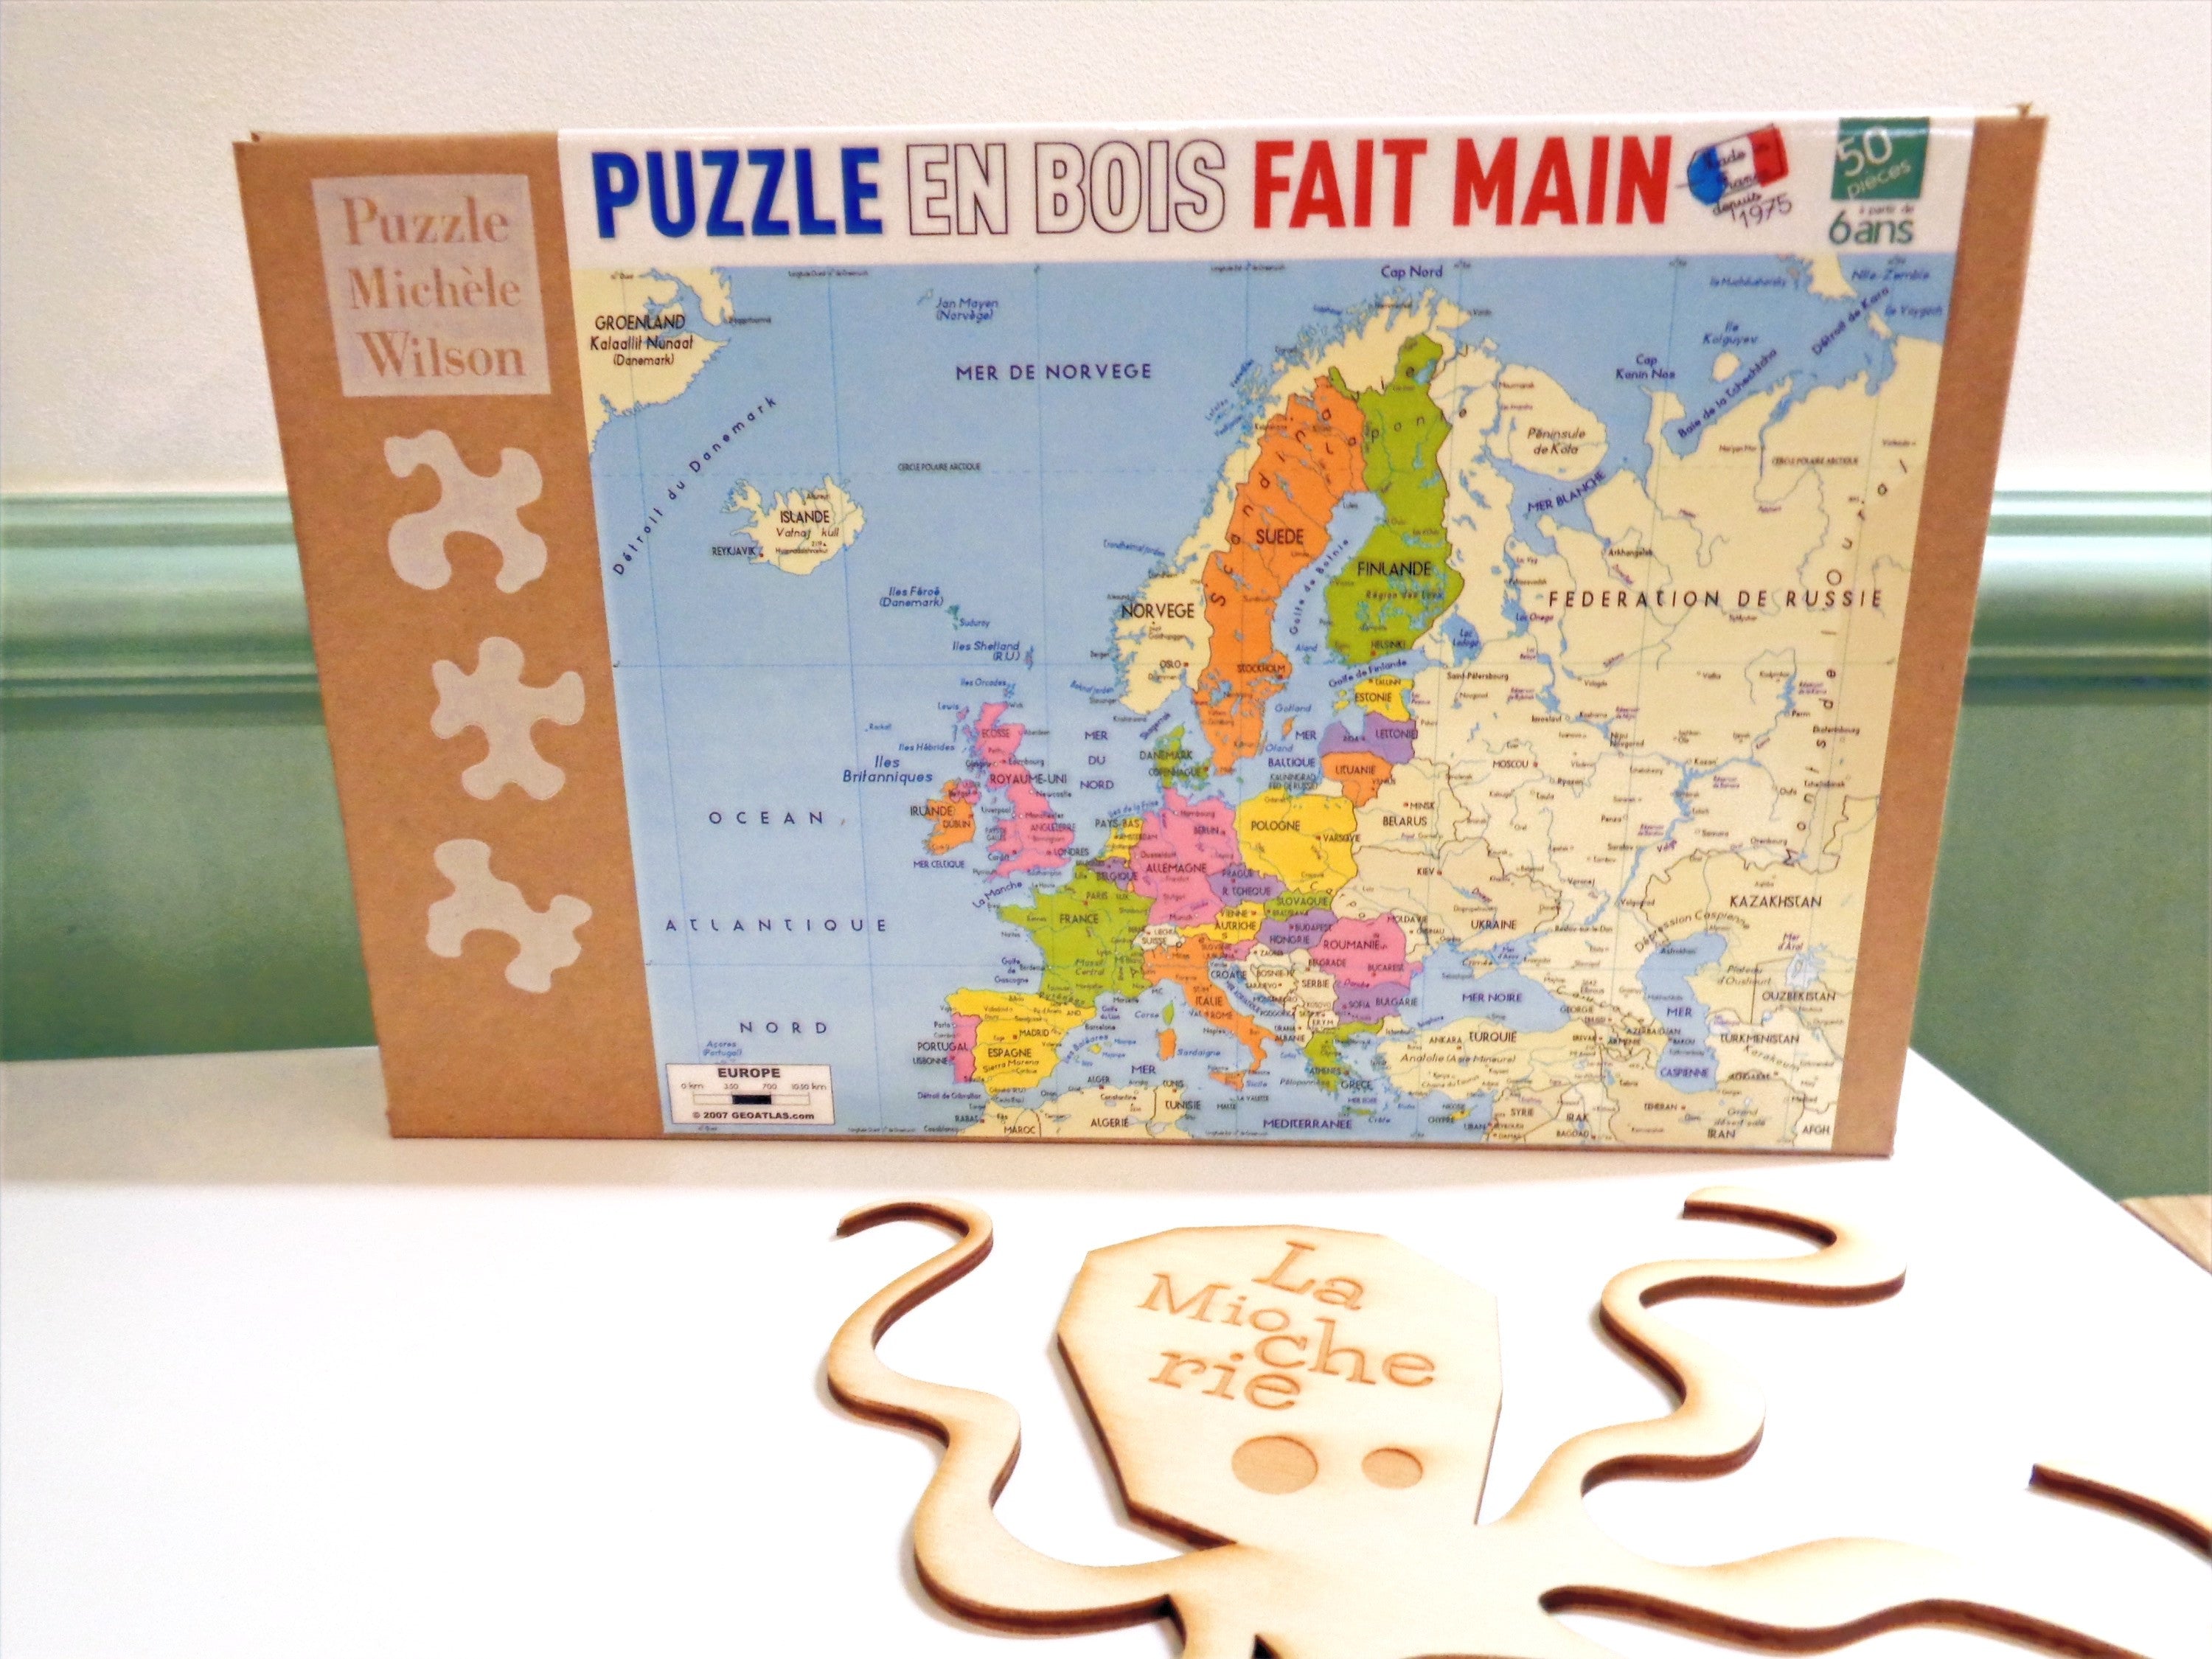 50 piece wooden puzzle Map of Europe - Made in France - Michèle Wilson